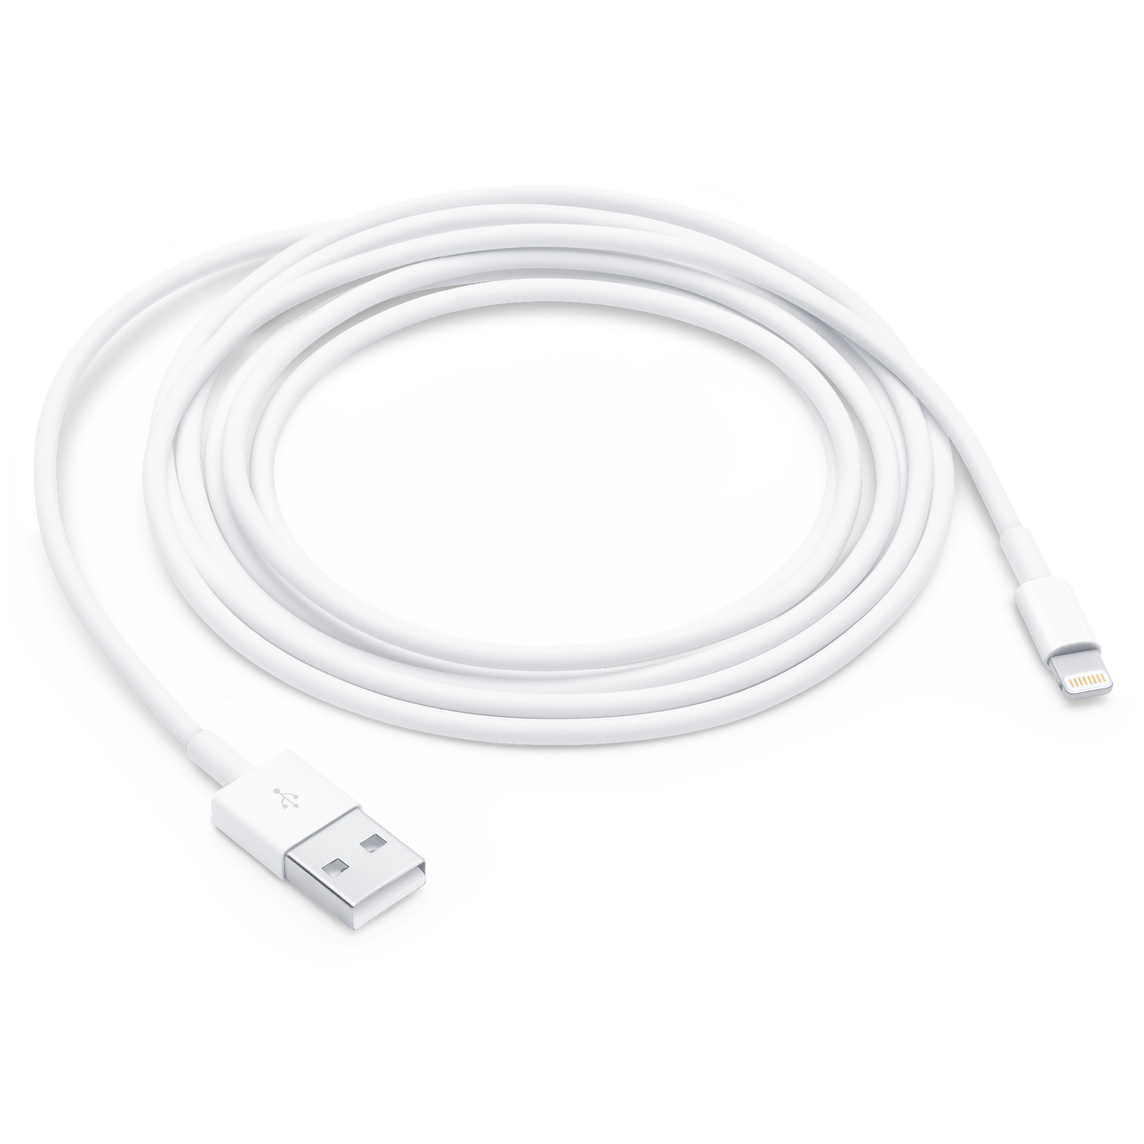 Comtrading USB cable 